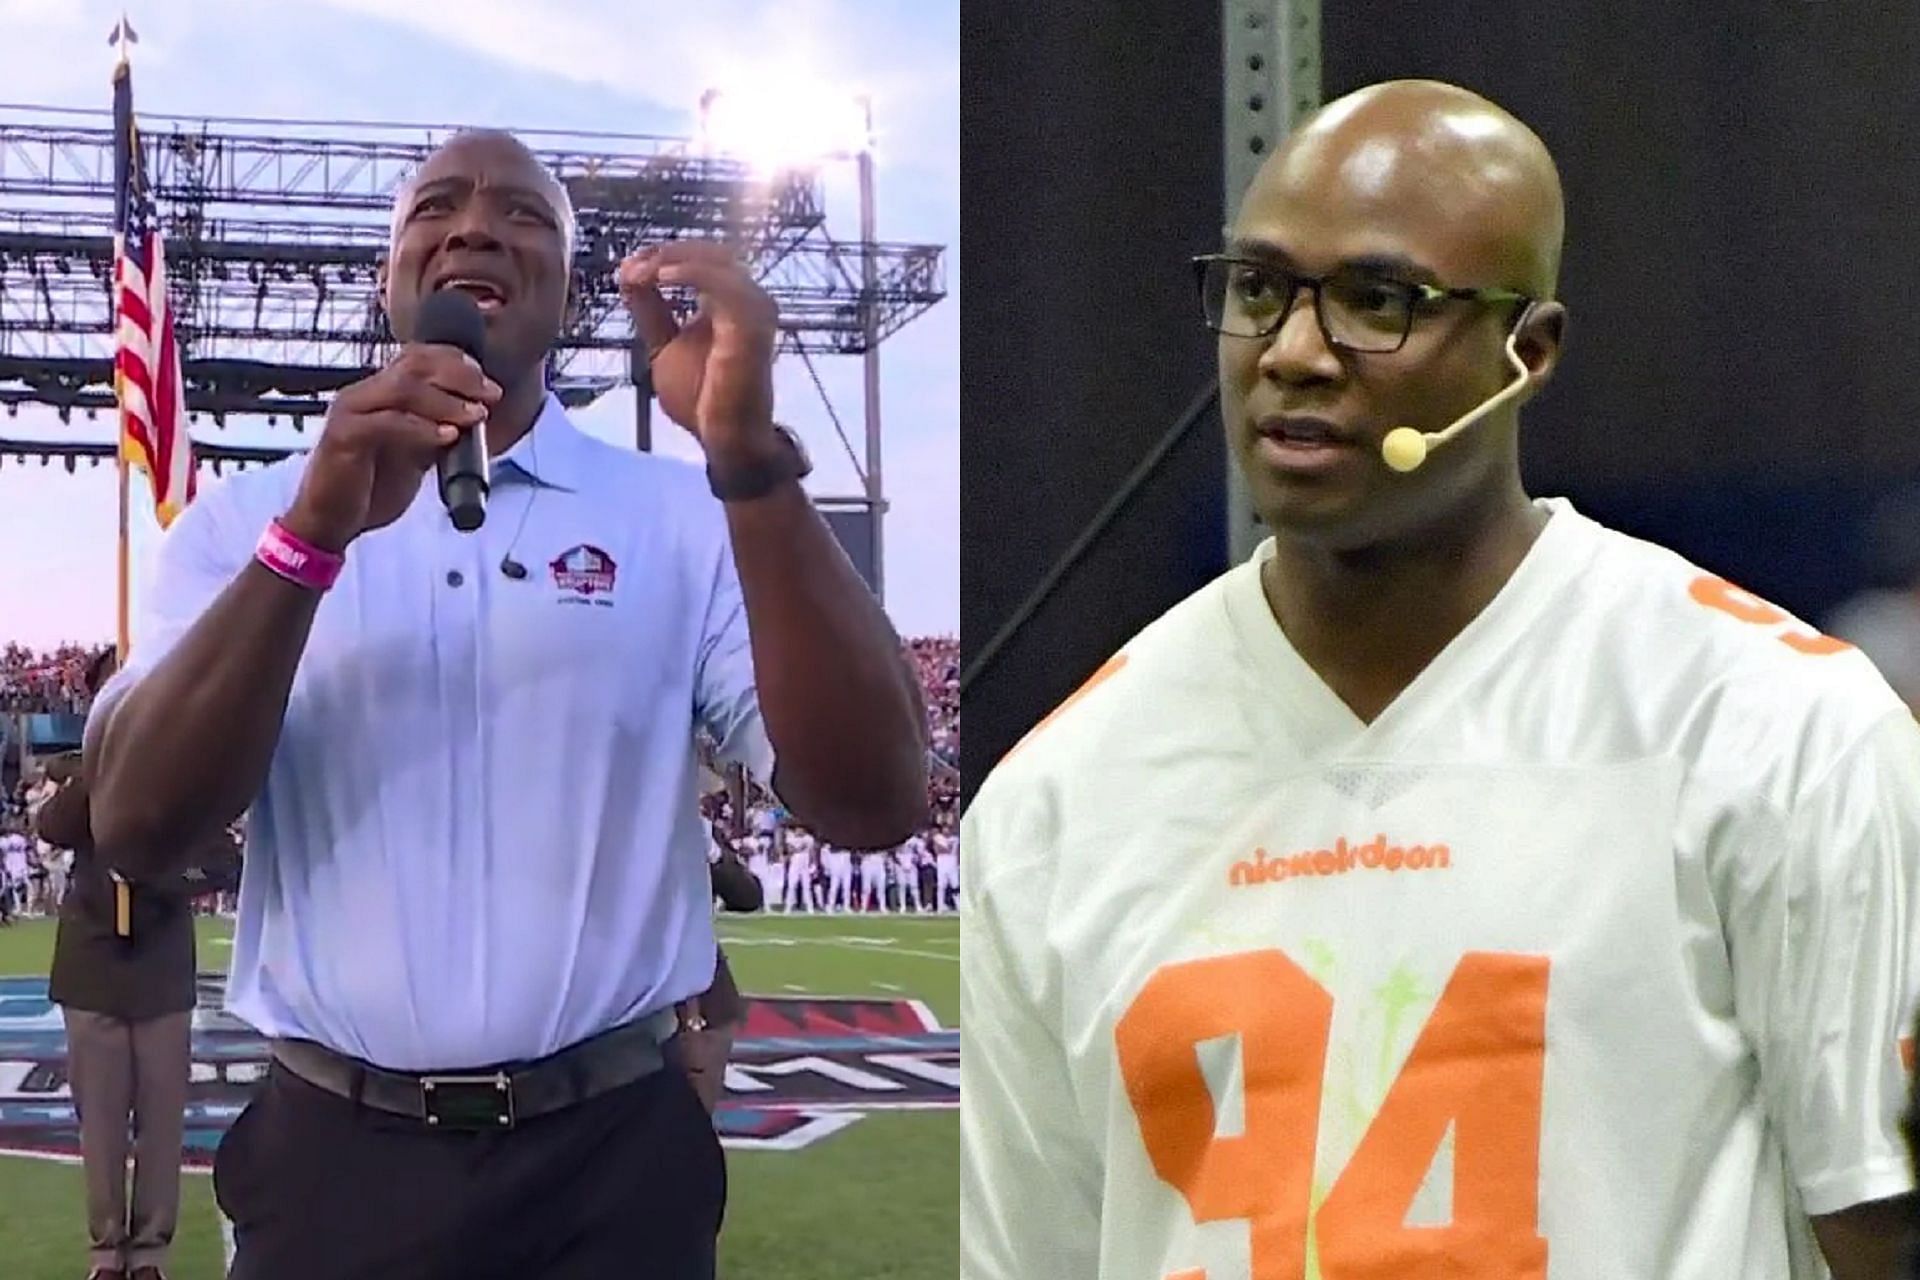 DeMarcus Ware goes viral for singing National Anthem ahead of Hall of Fame game between Jets and Browns